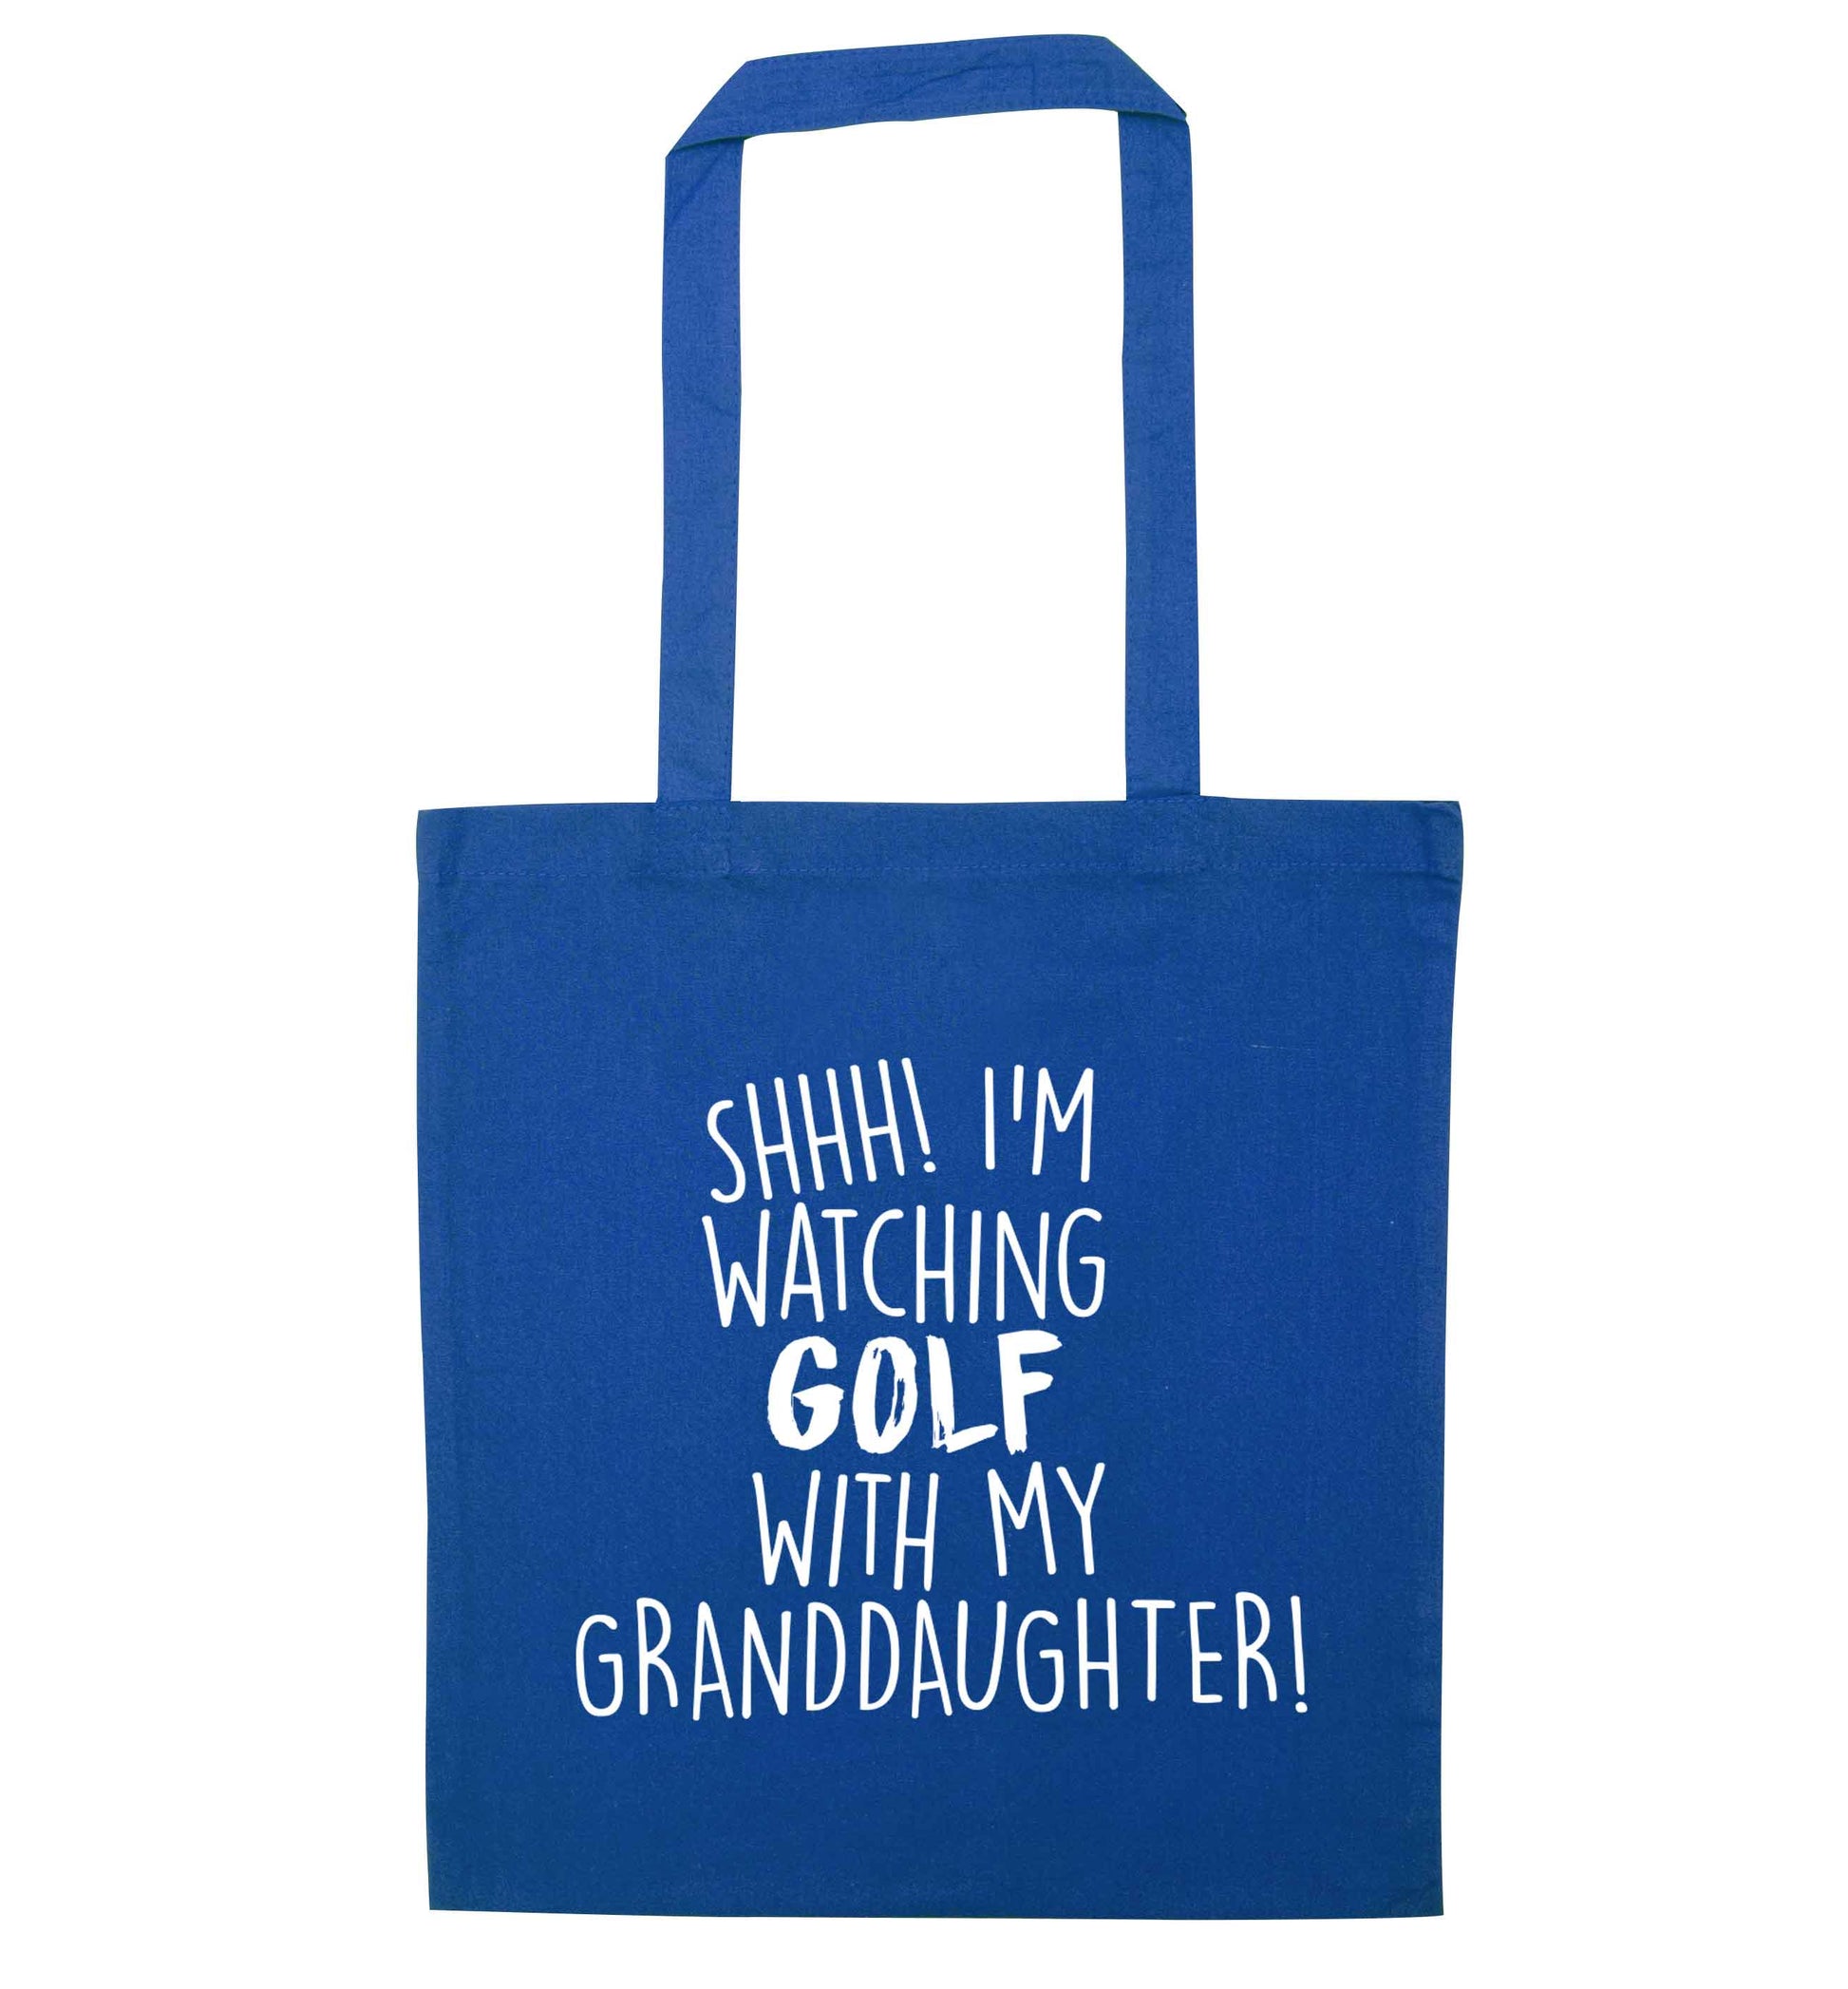 Shh I'm watching golf with my granddaughter blue tote bag